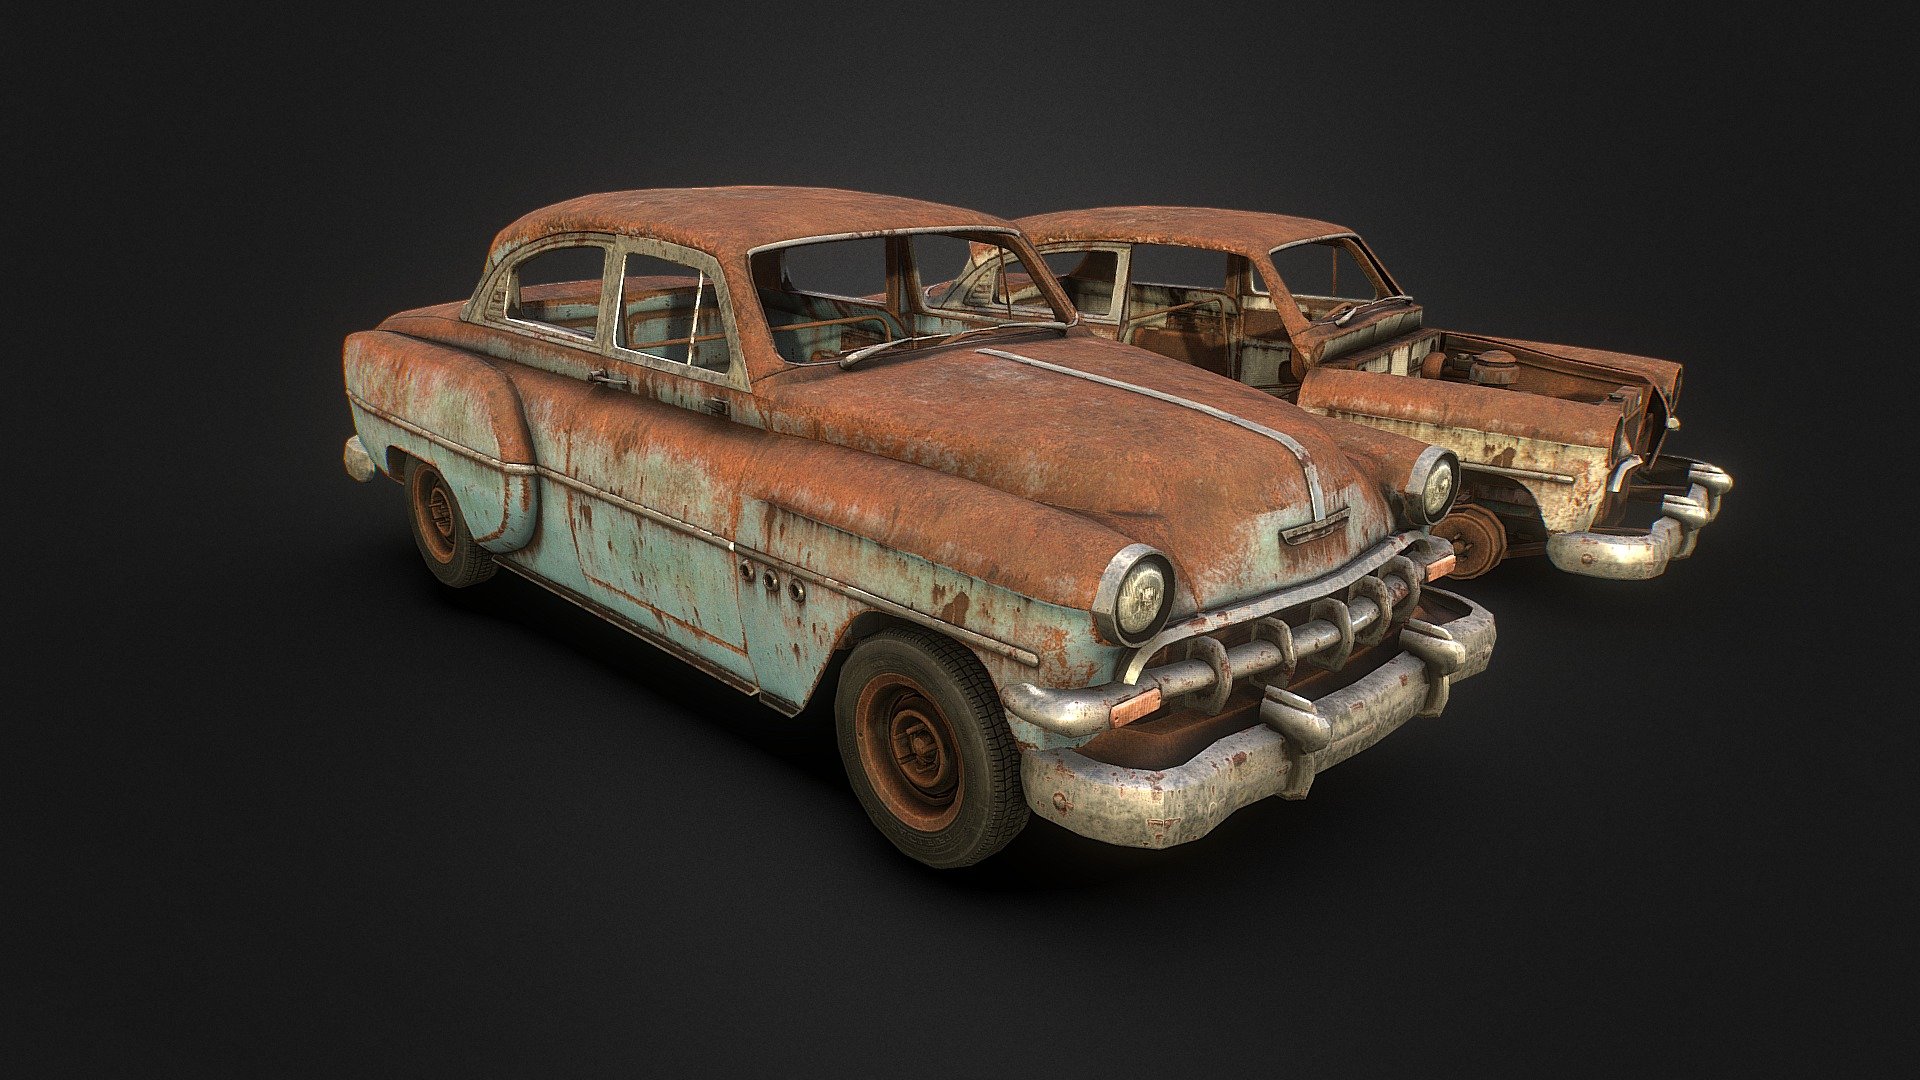 A remake of my classic &ldquo;Old Rusty Car